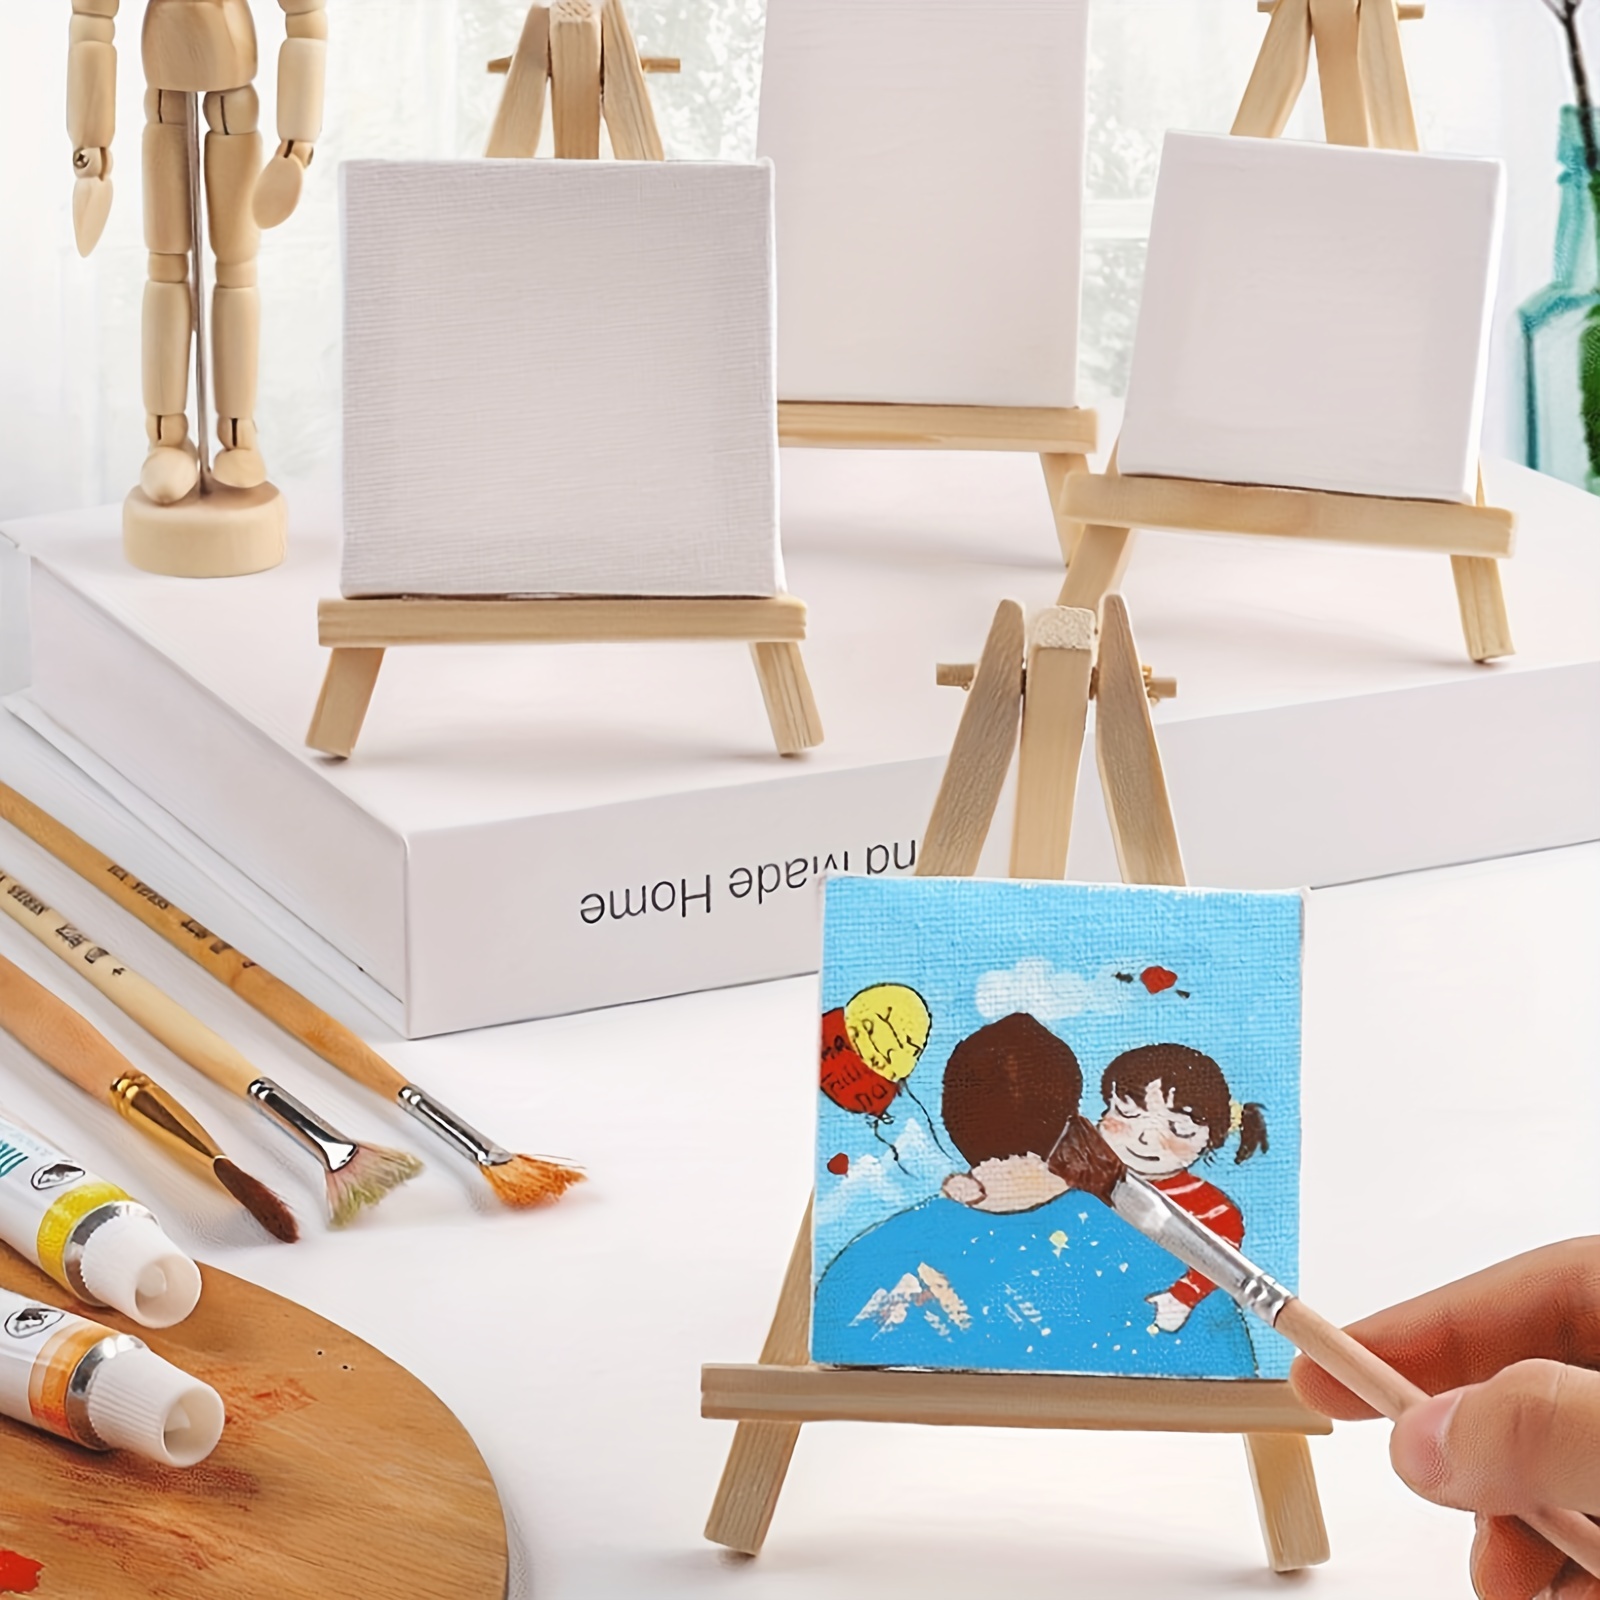 Small Easel with White Blank Cloth on a Wooden Table. Miniature Painting  Accessories Stock Photo - Image of exhibition, easel: 199067012